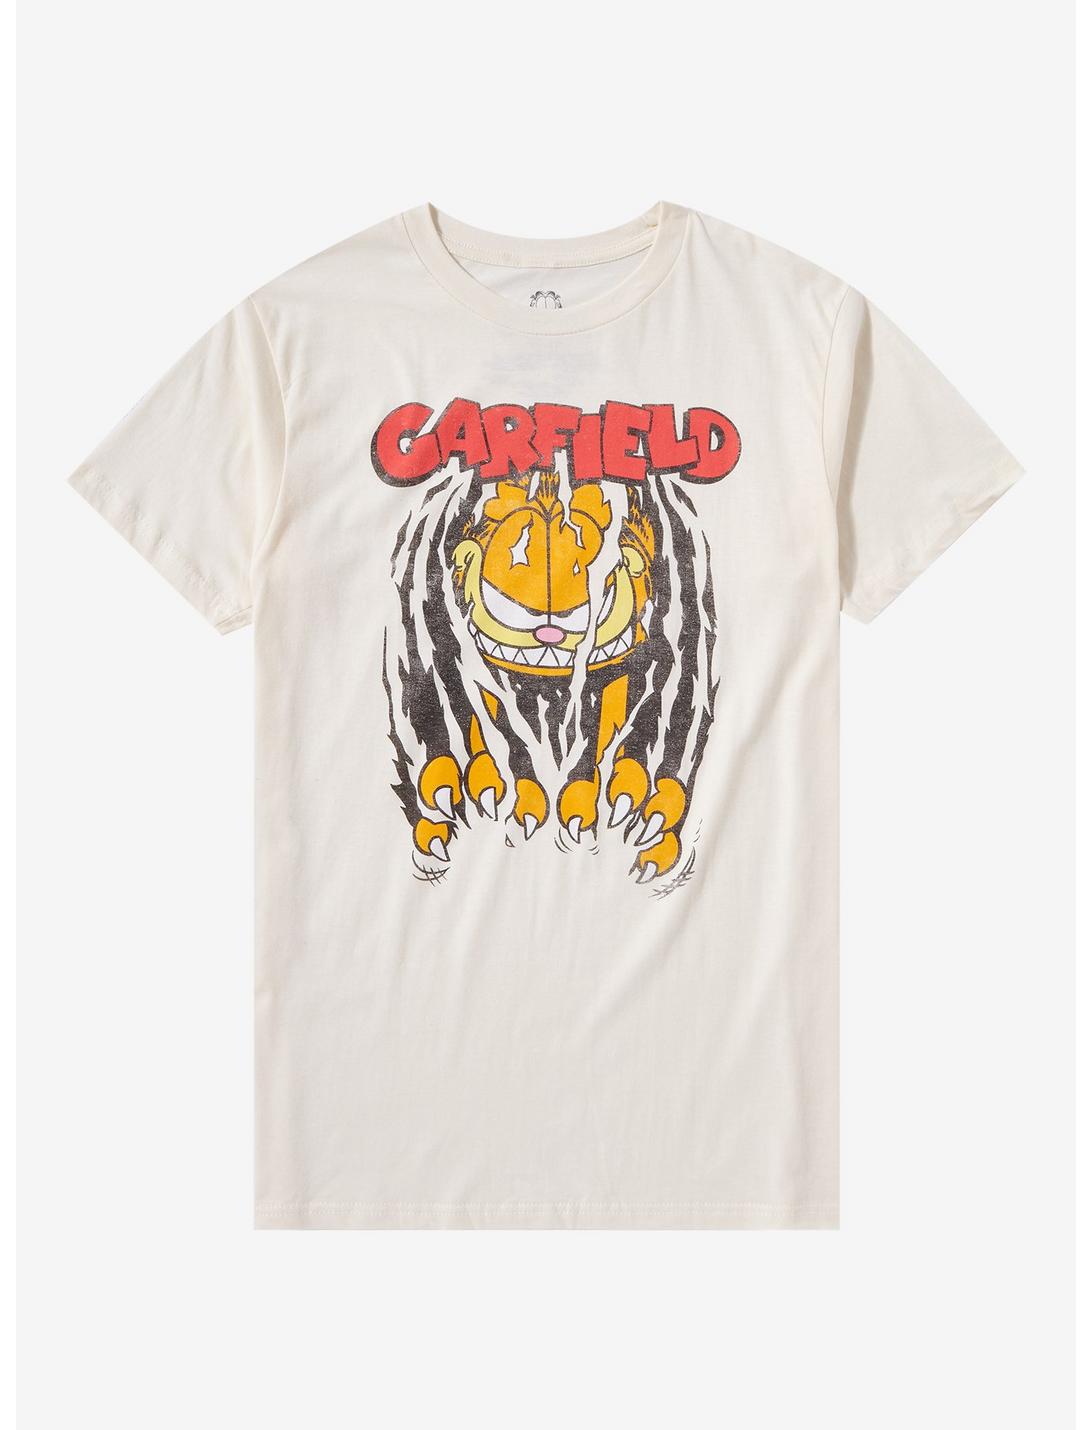 Garfield Claws Out T-Shirt, BEIGE, hi-res